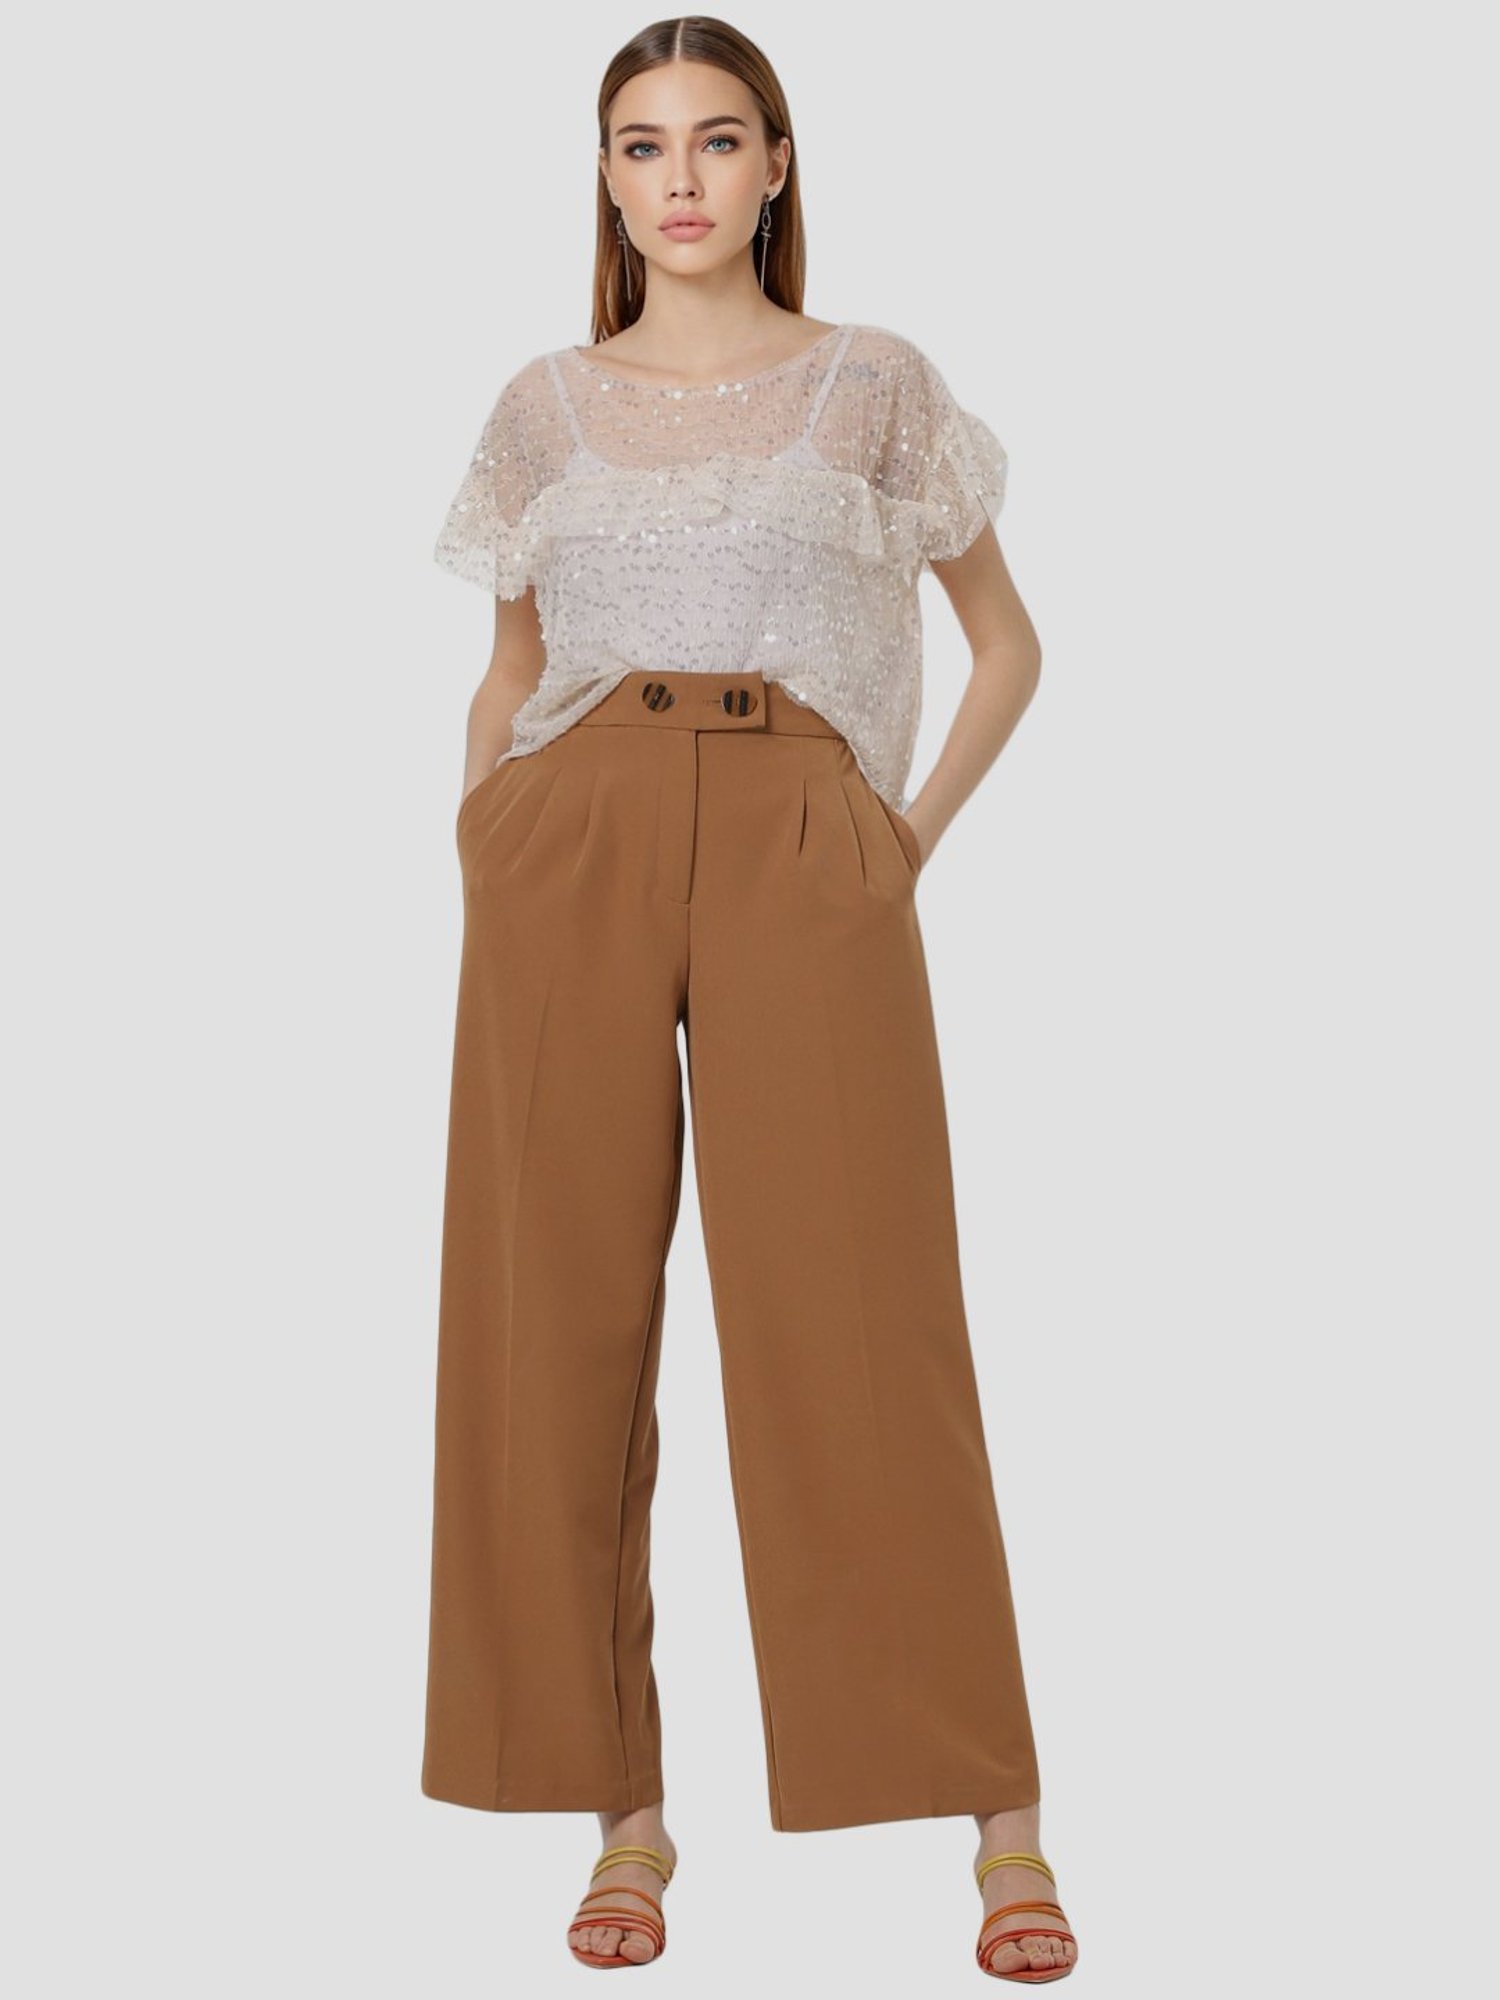 MS Womens Brown Trousers Size 10 L29 in Rewards  Monetha